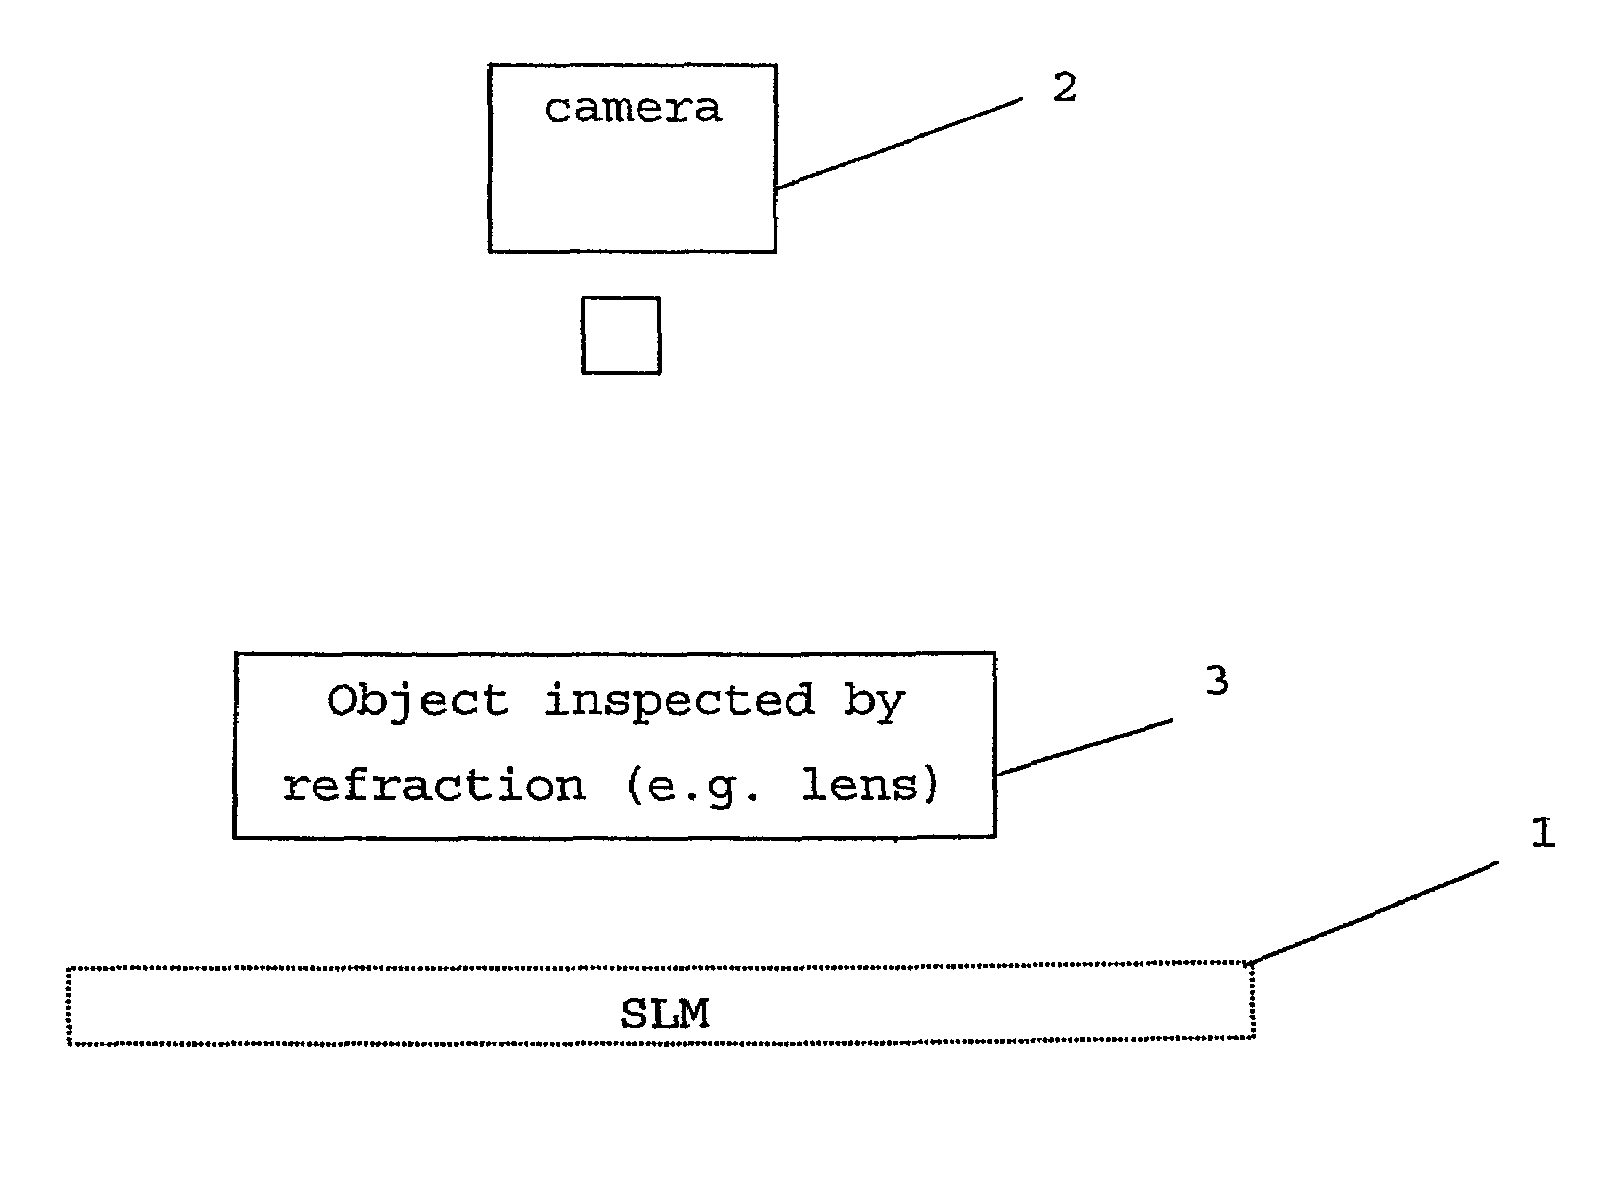 Appliance for controlling transparent or reflective elements